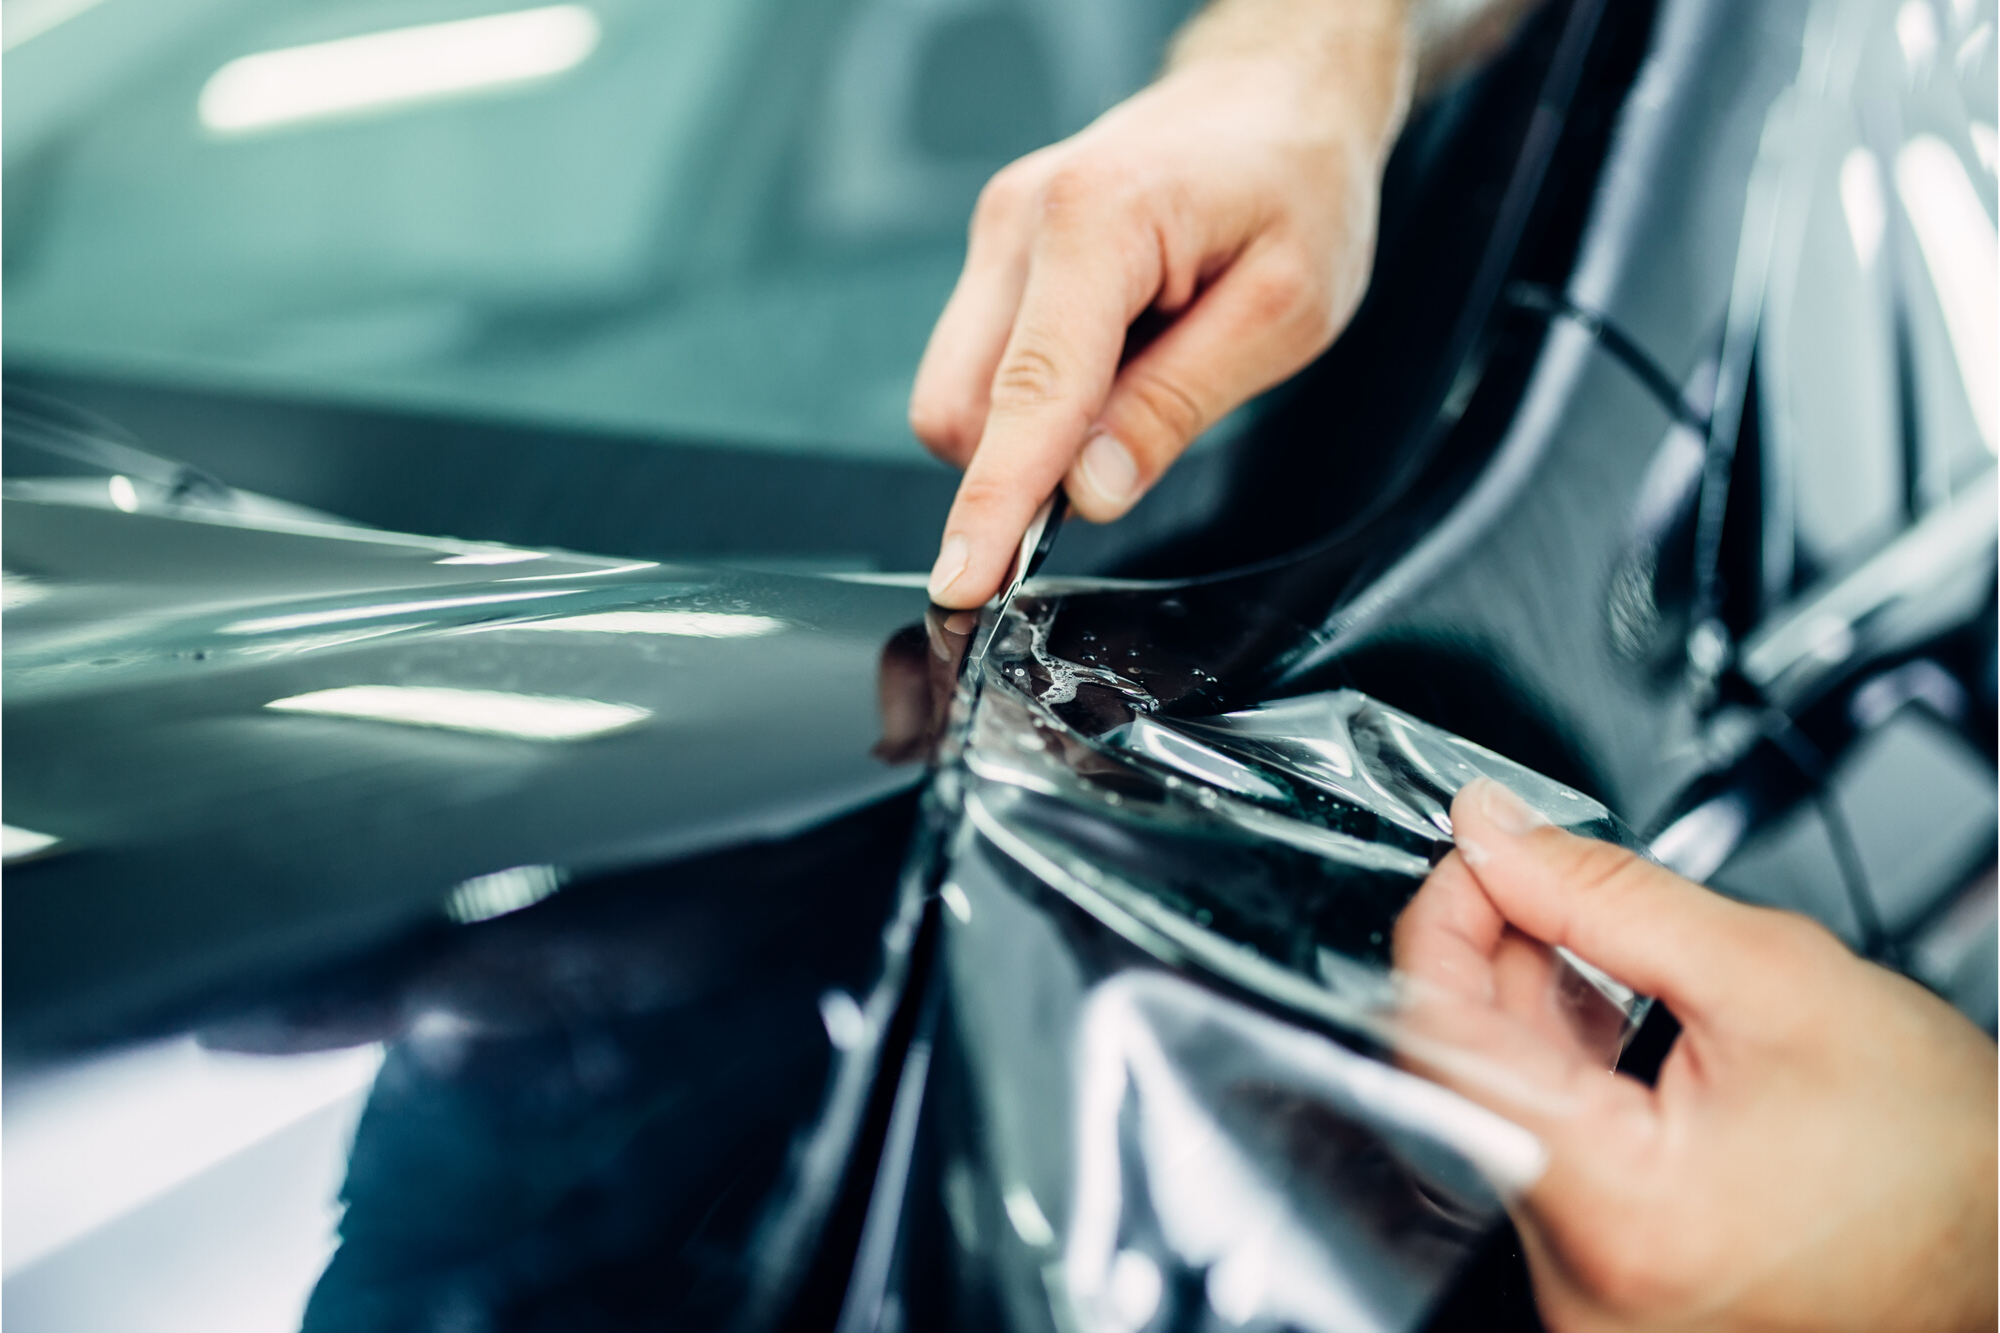 Wrapping your car – vehicles can be easily upgraded with these tips!